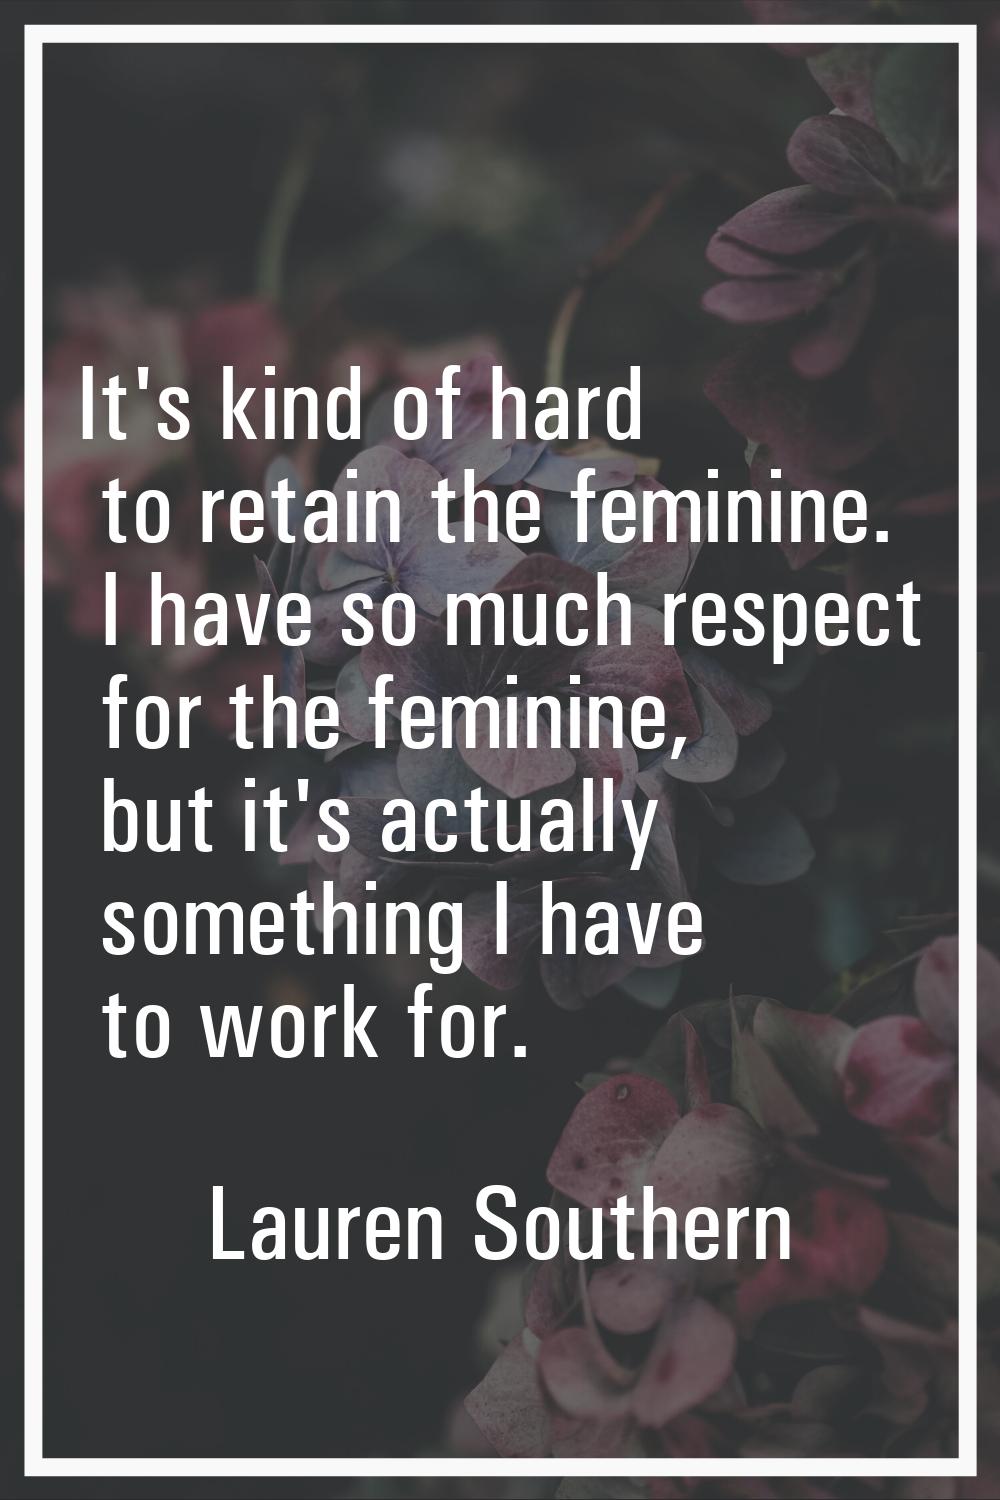 It's kind of hard to retain the feminine. I have so much respect for the feminine, but it's actuall